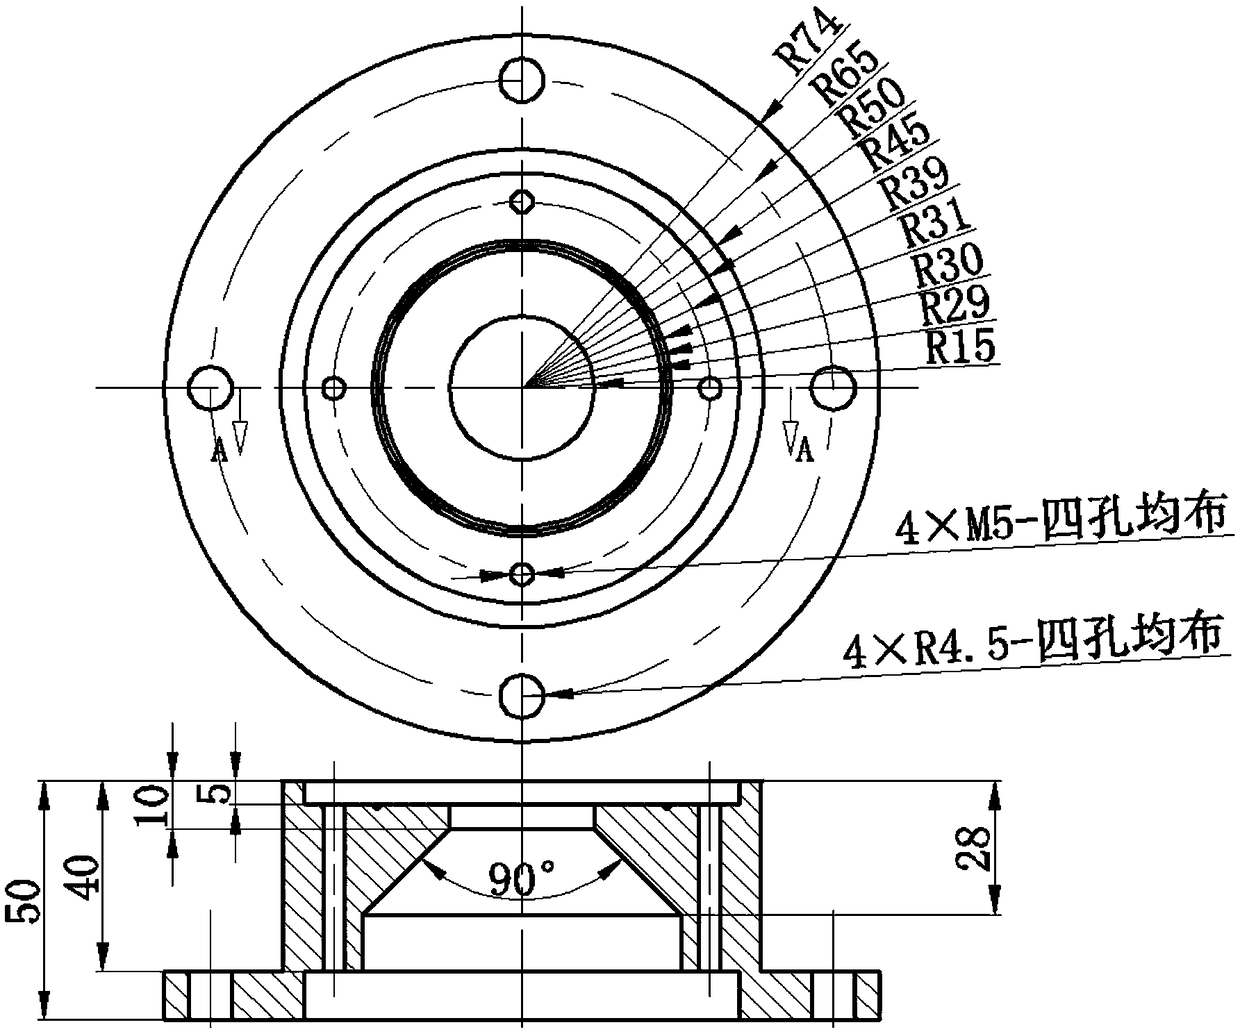 Single body effect target device suitable for measurement of target shock wave pressure of movable explosion field